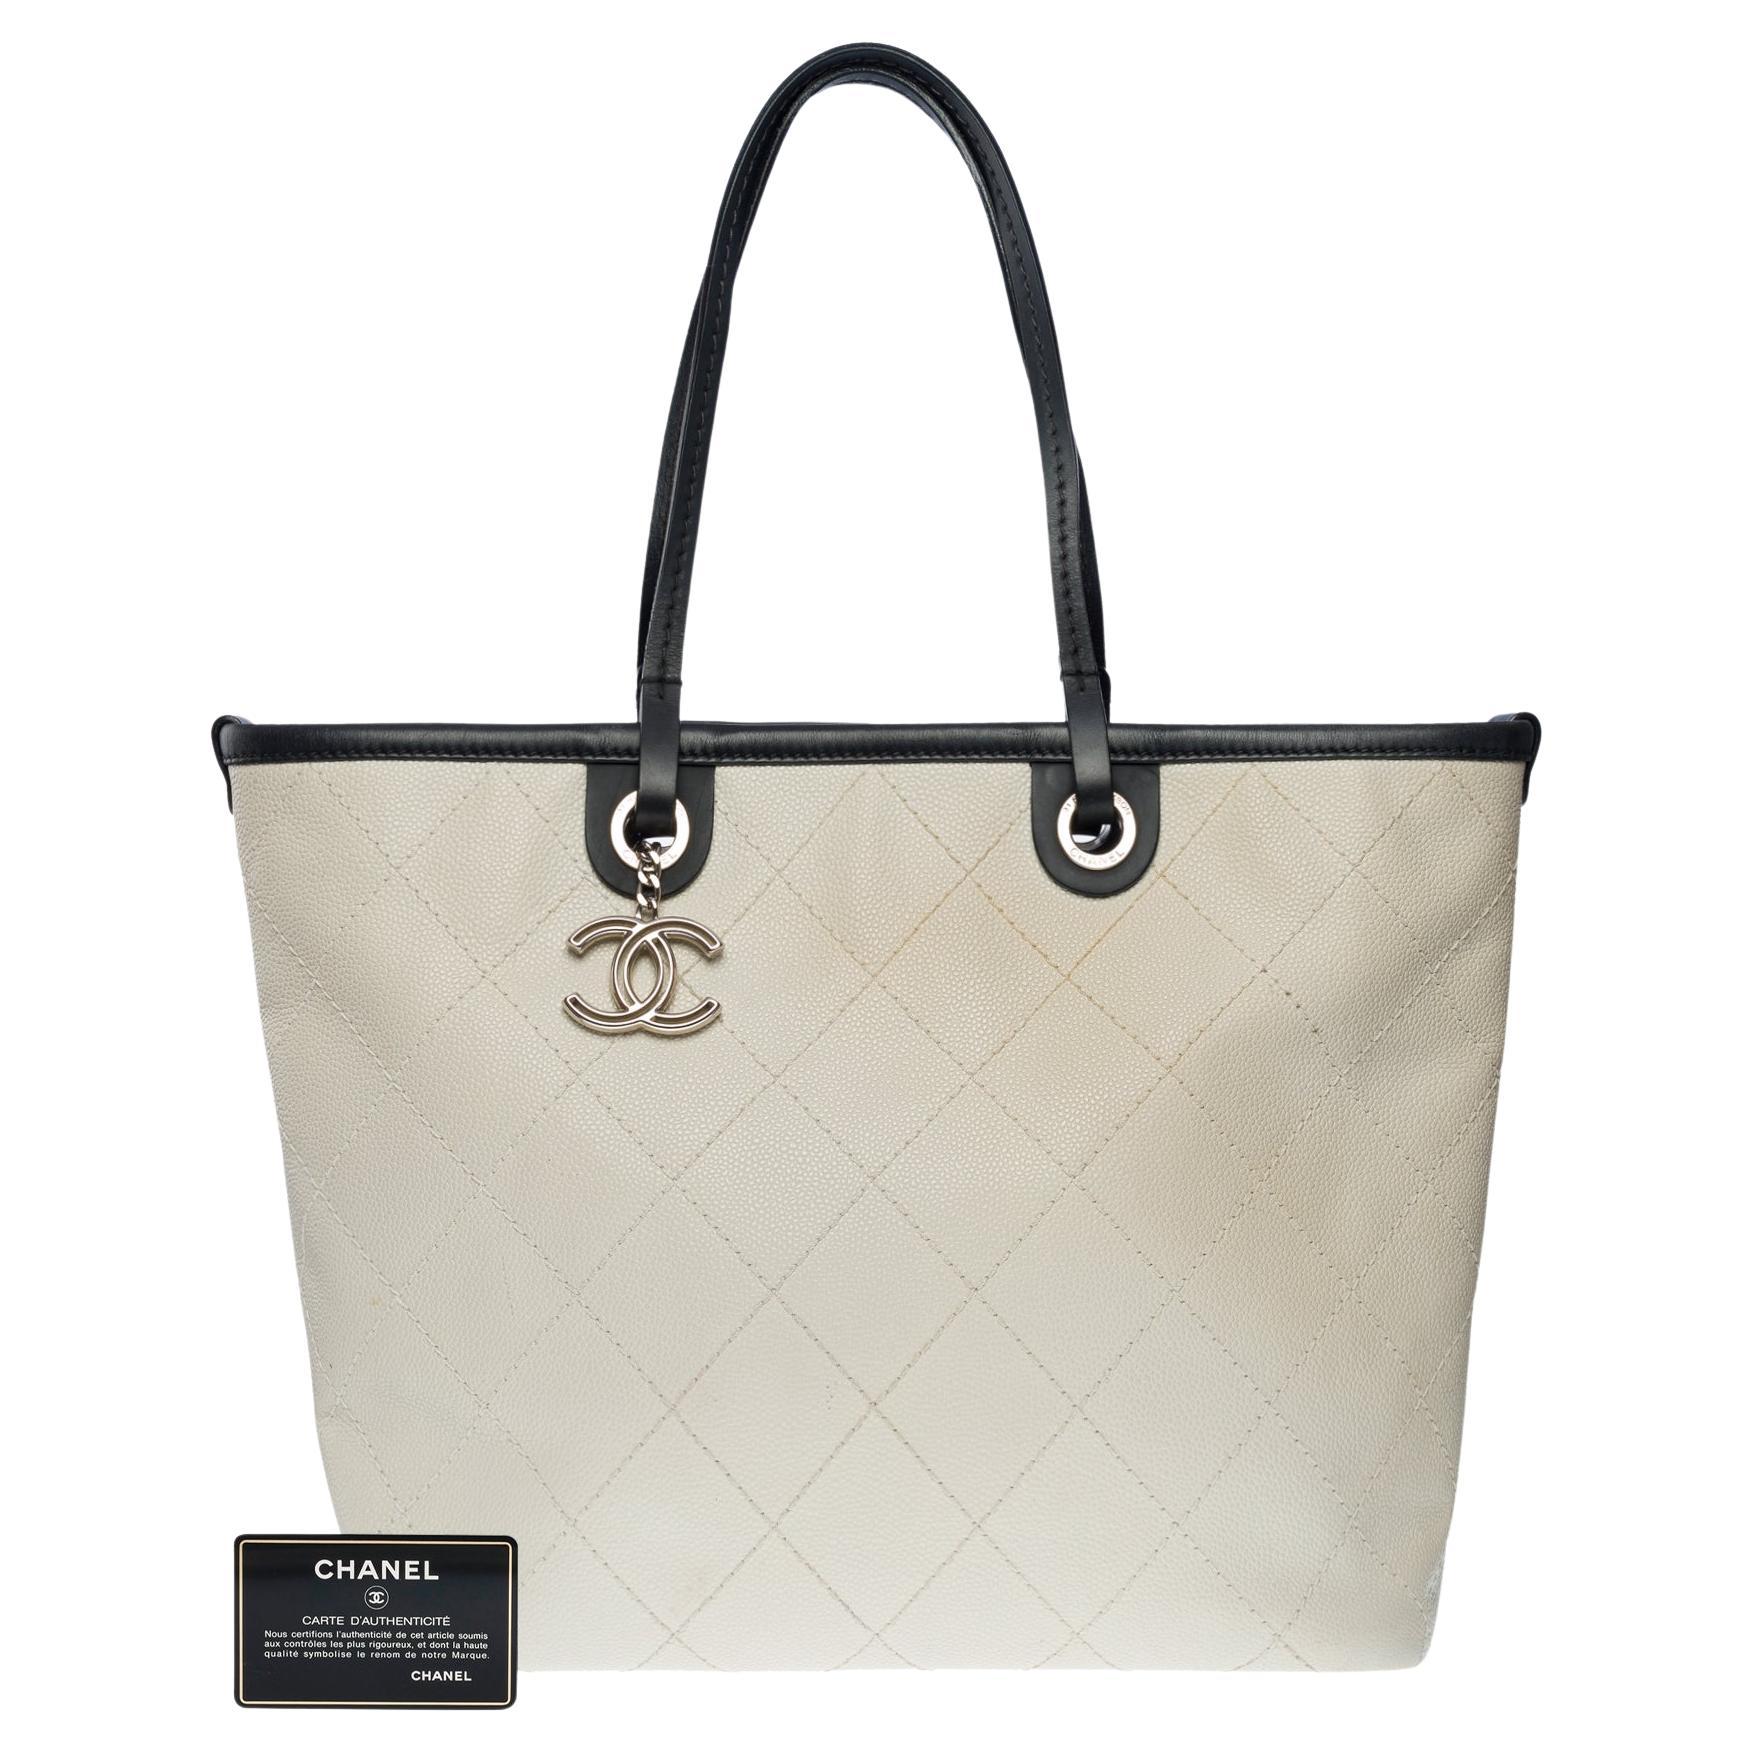 Amazing Chanel Shopping Tote bag in White Caviar quilted leather, SHW